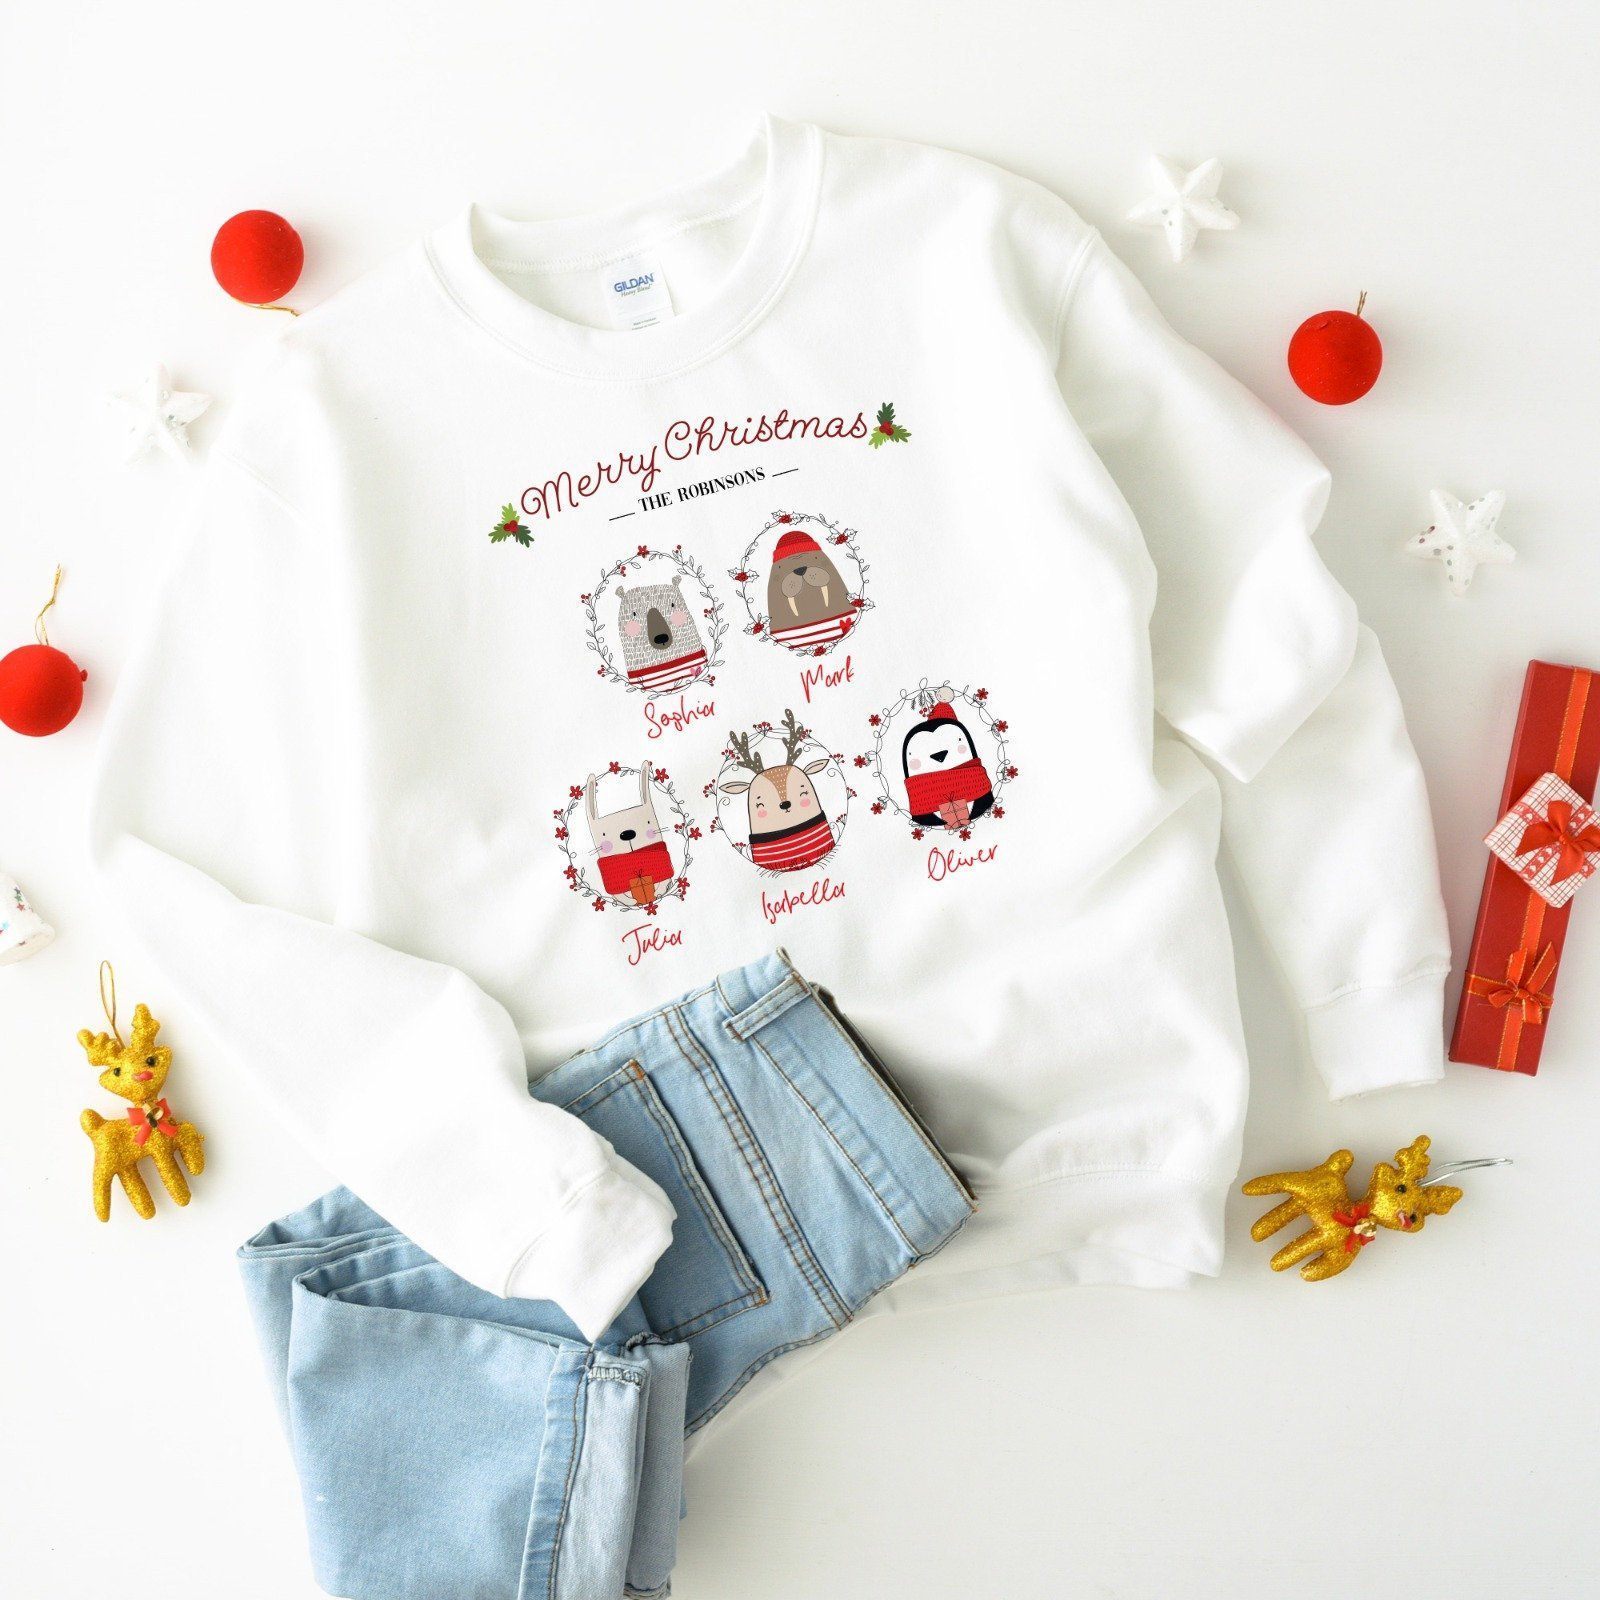 Matching Family Christmas jumpers, Suitable all ages, Cosy Christmas sweatshirt